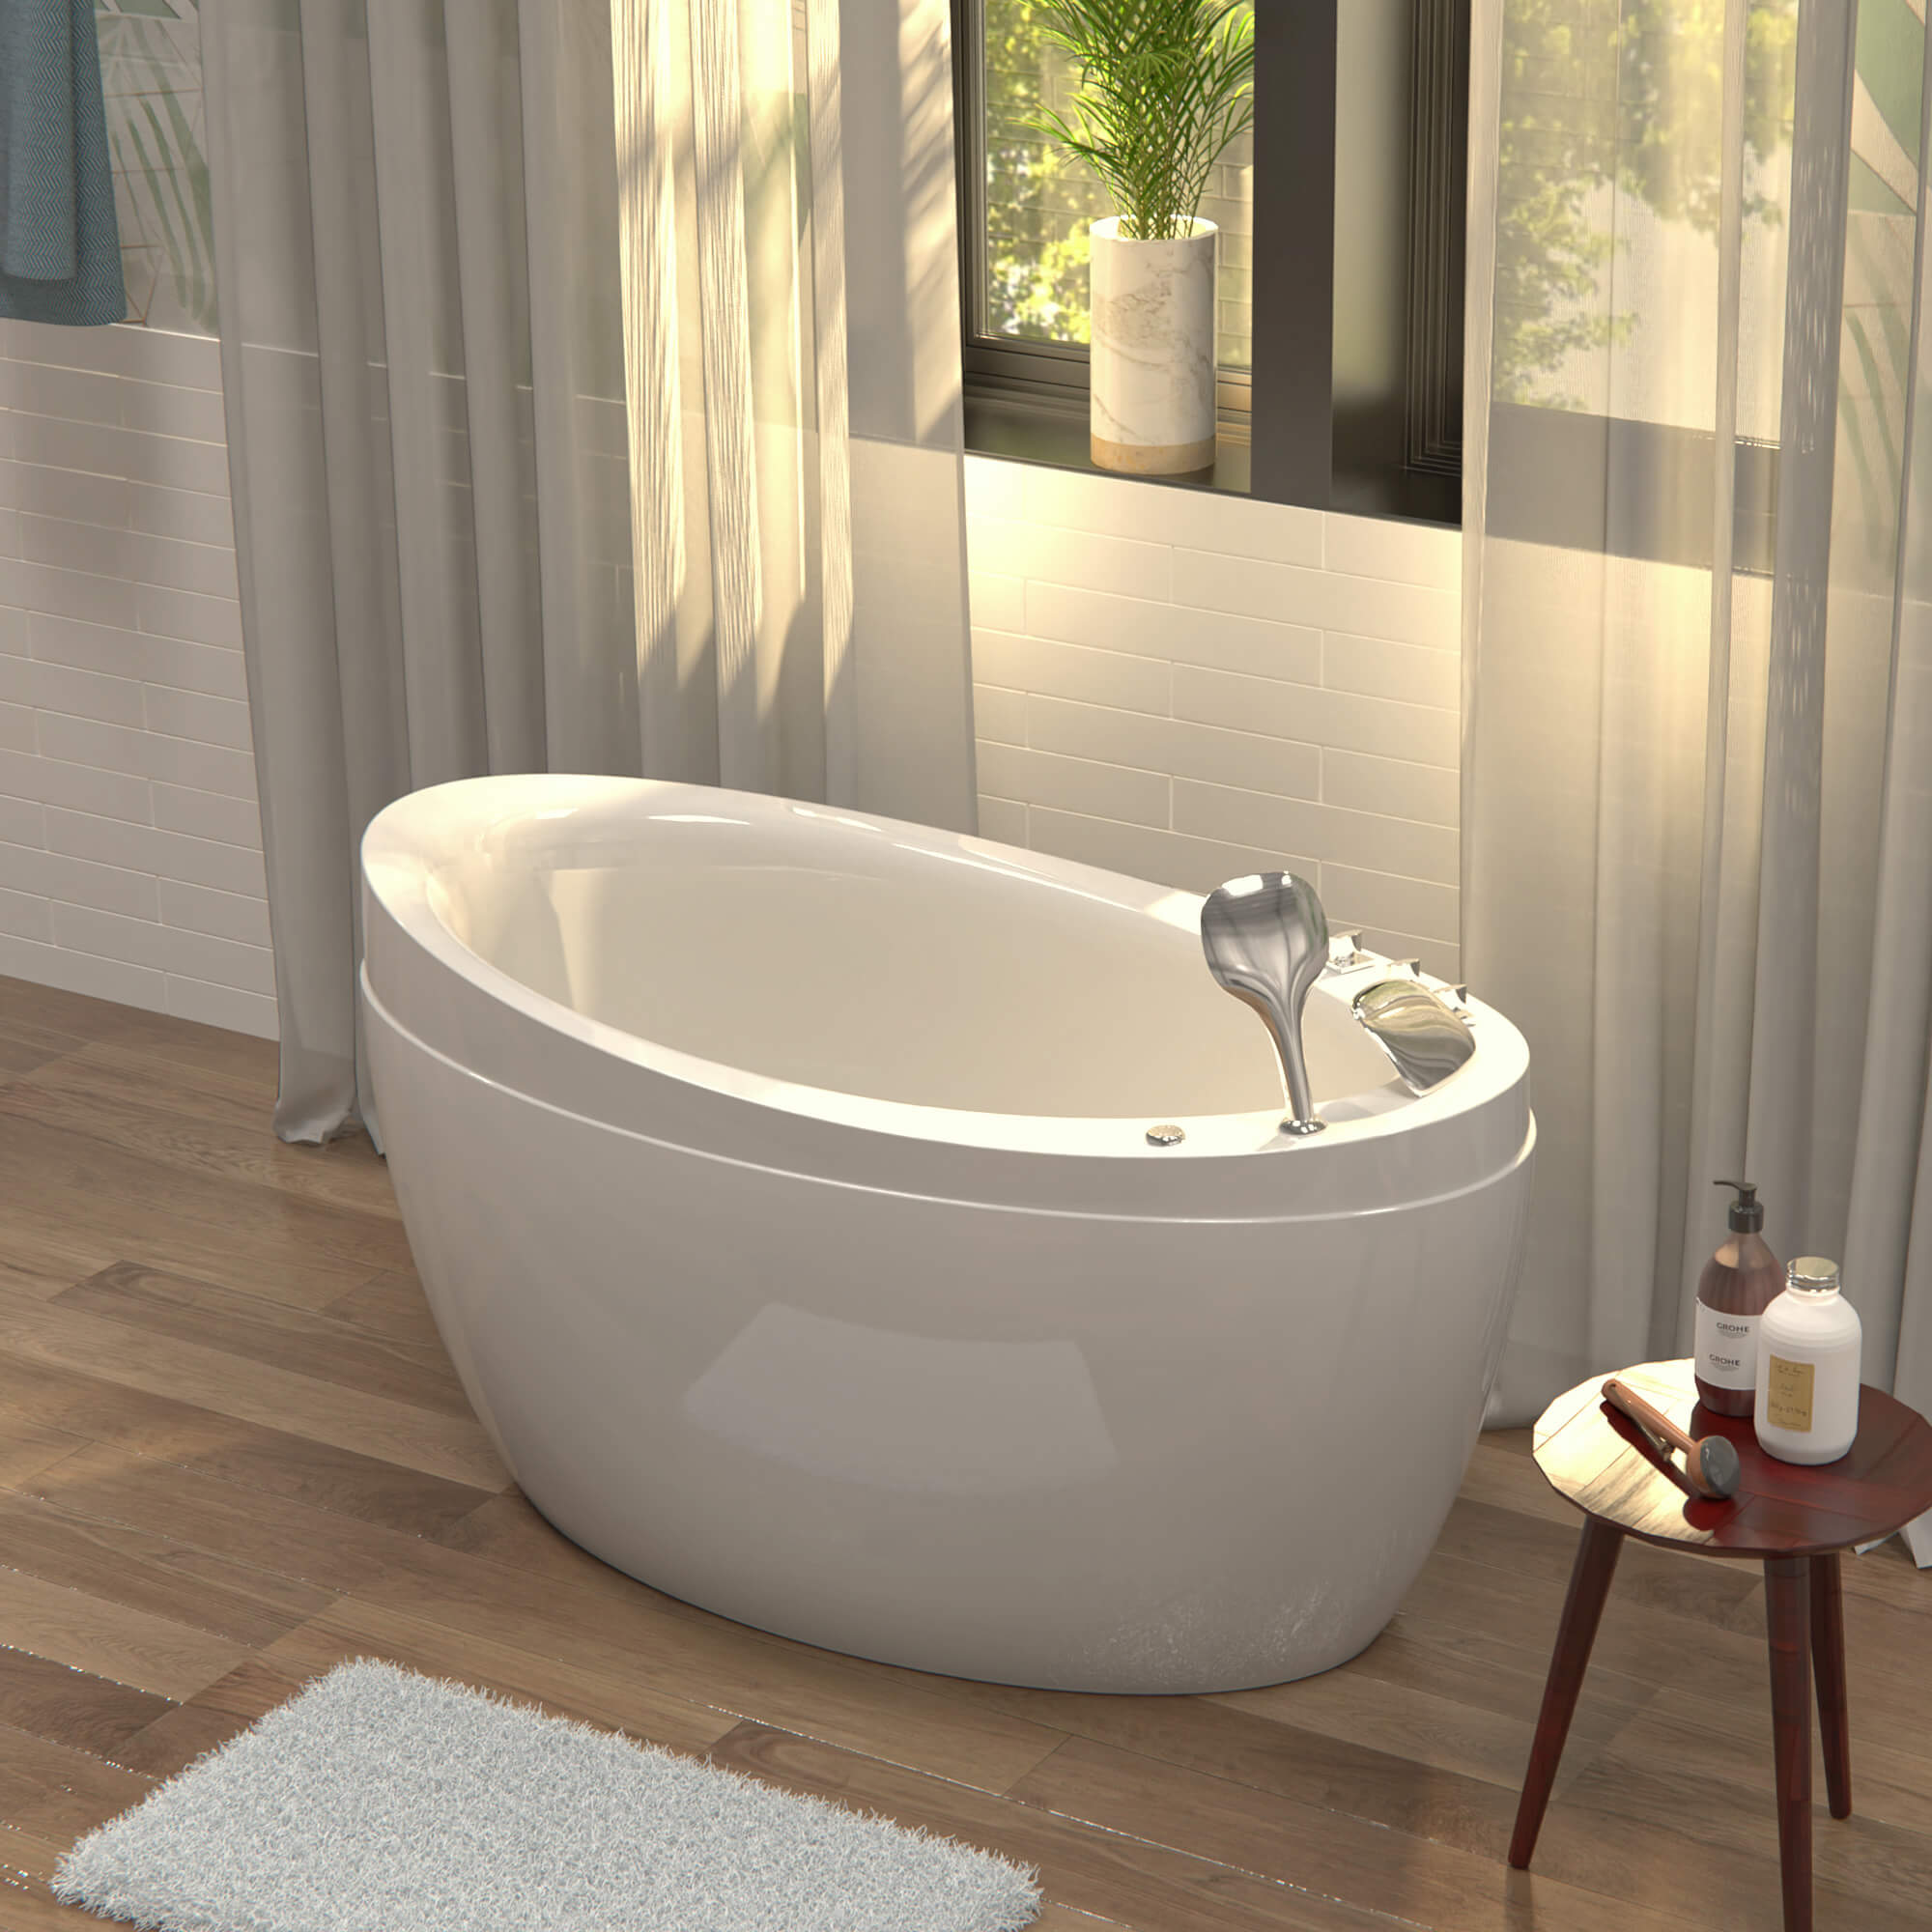 Empava | 59JT011 59 in. Freestanding Japanese-Style Air Massage Tub